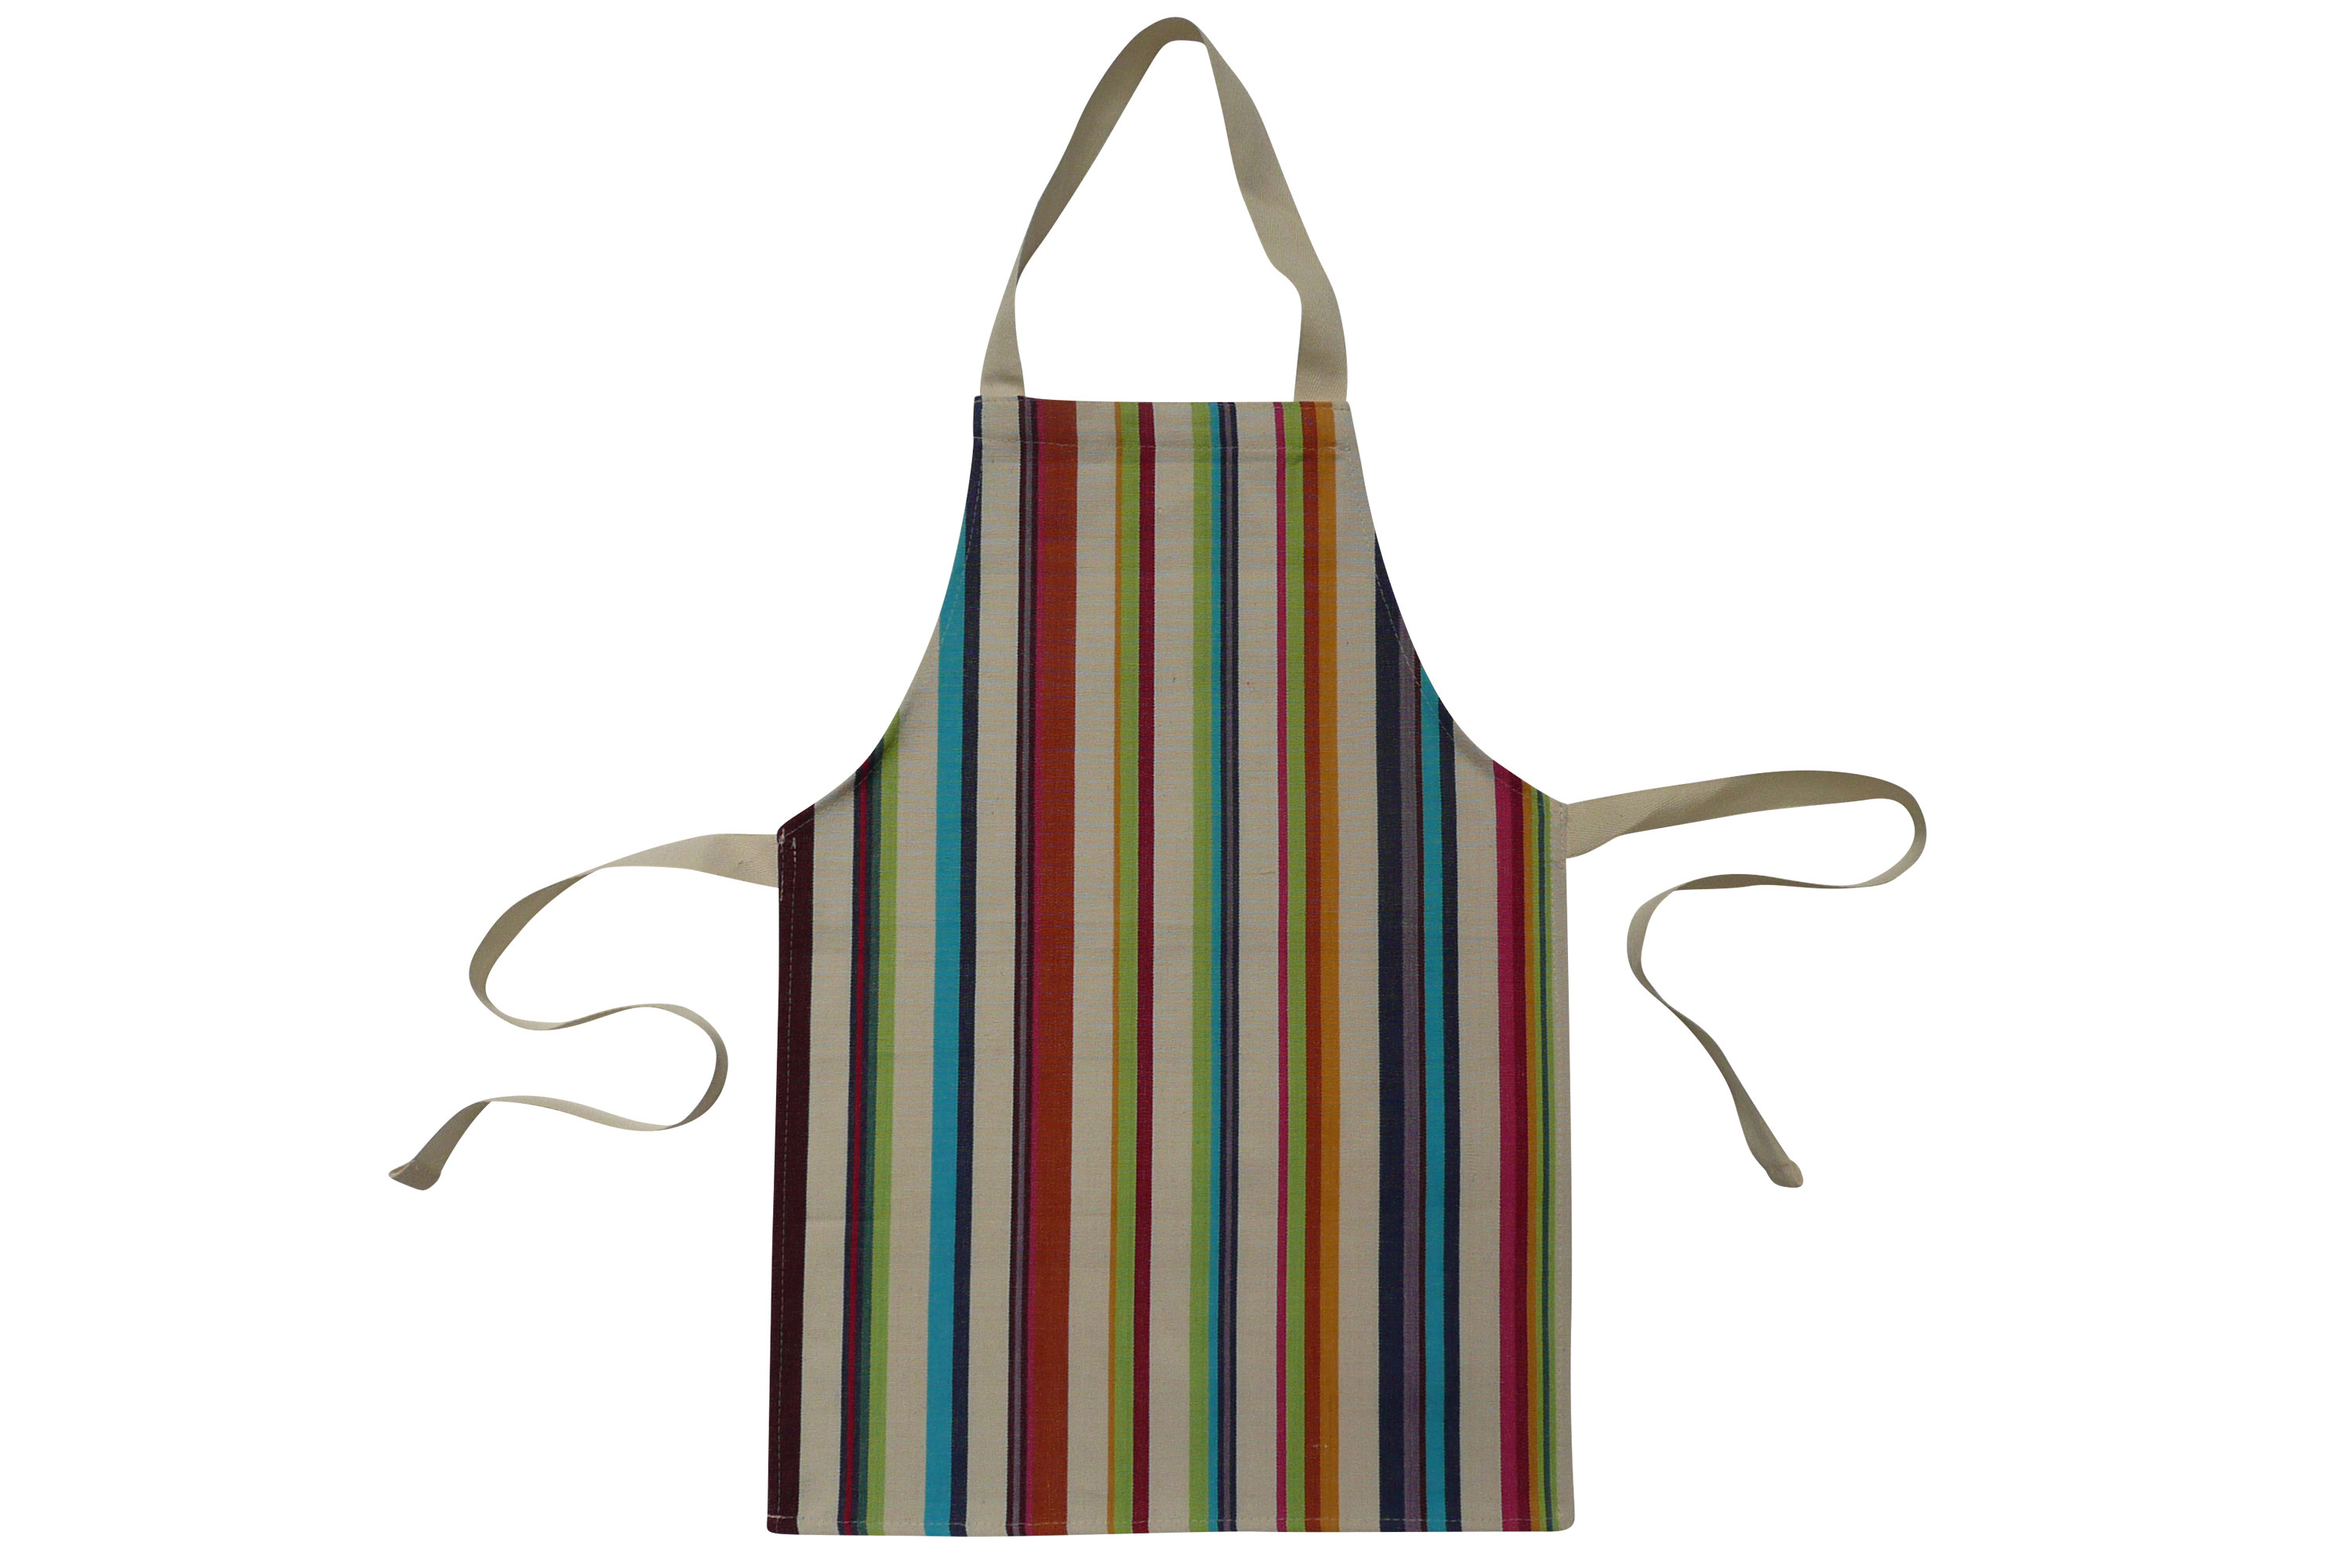 Cream Toddlers Aprons - Striped Aprons For Small Children Cream  Brown  Terracotta  Green  Stripes